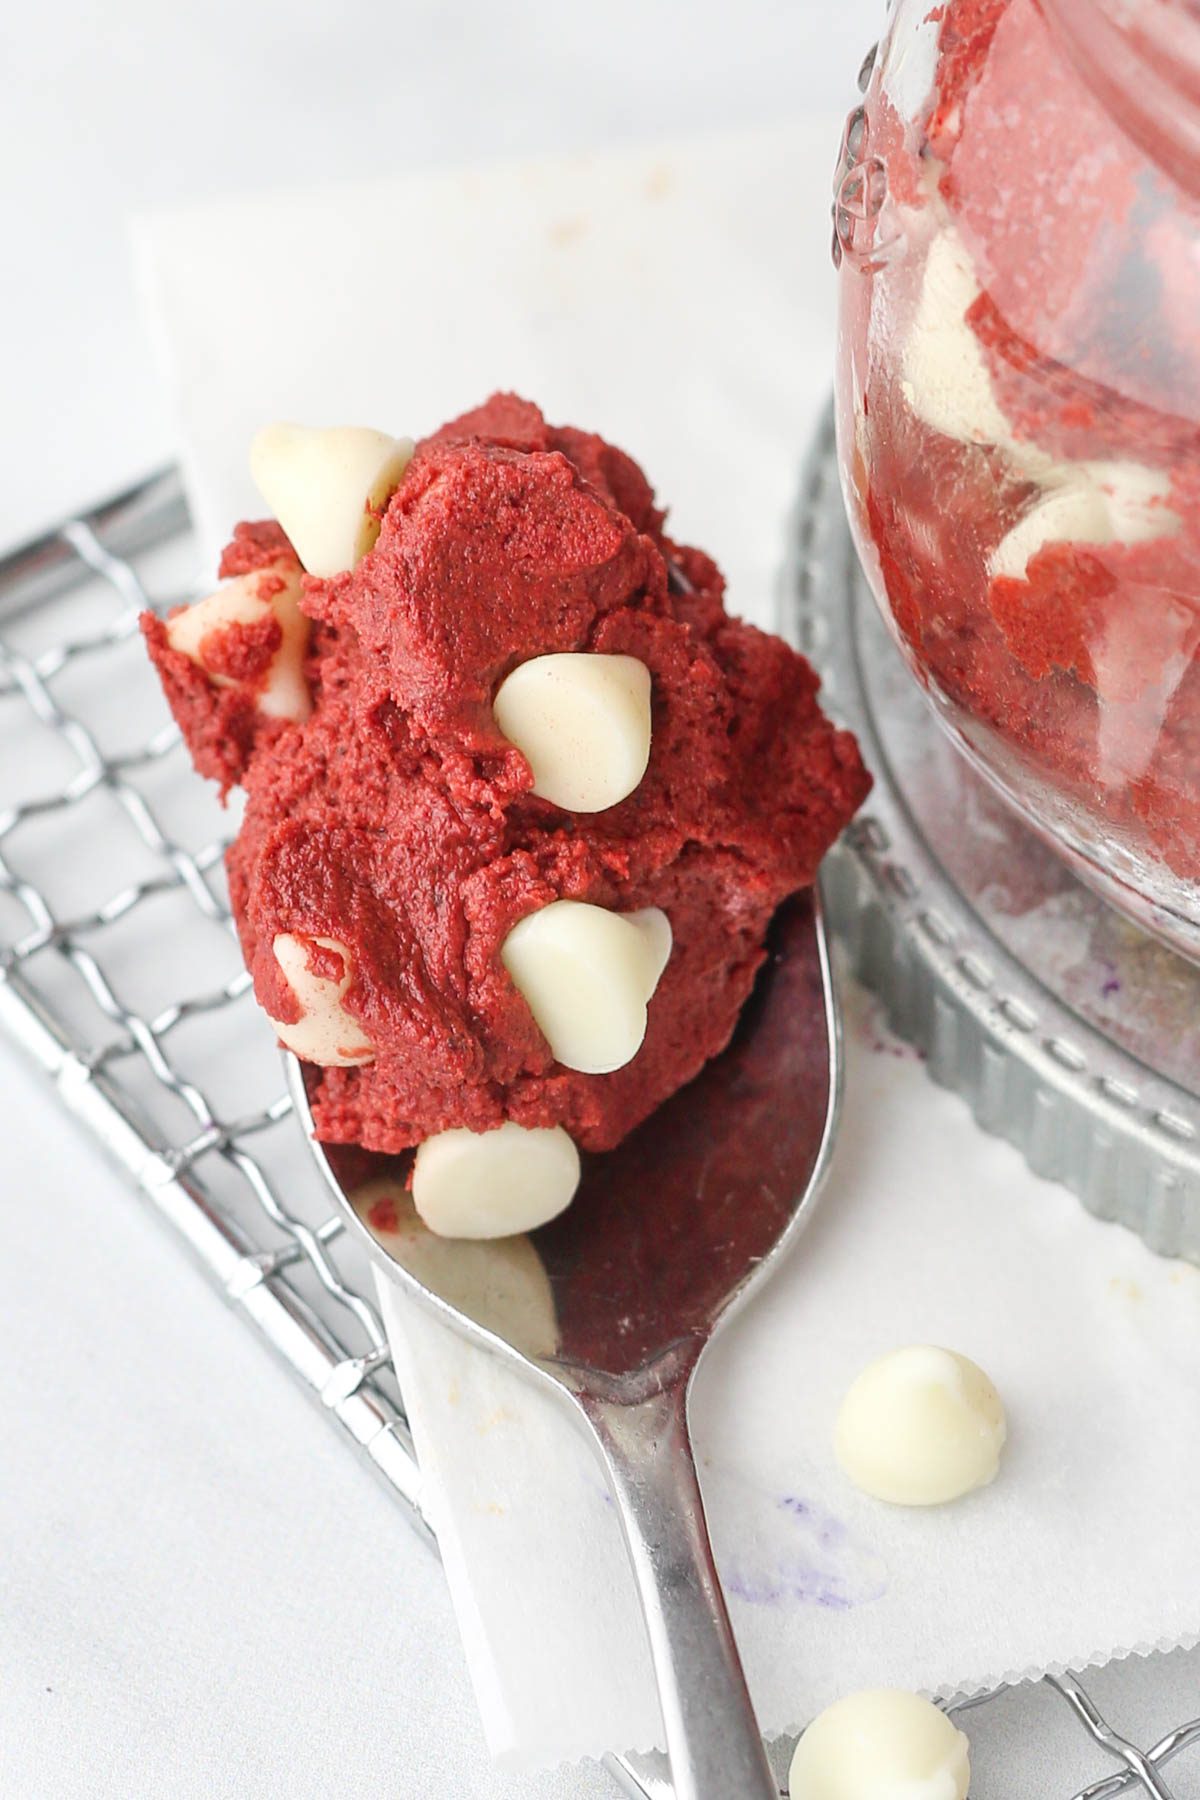 A spoonful of red velvet dough with white chocolate chips.